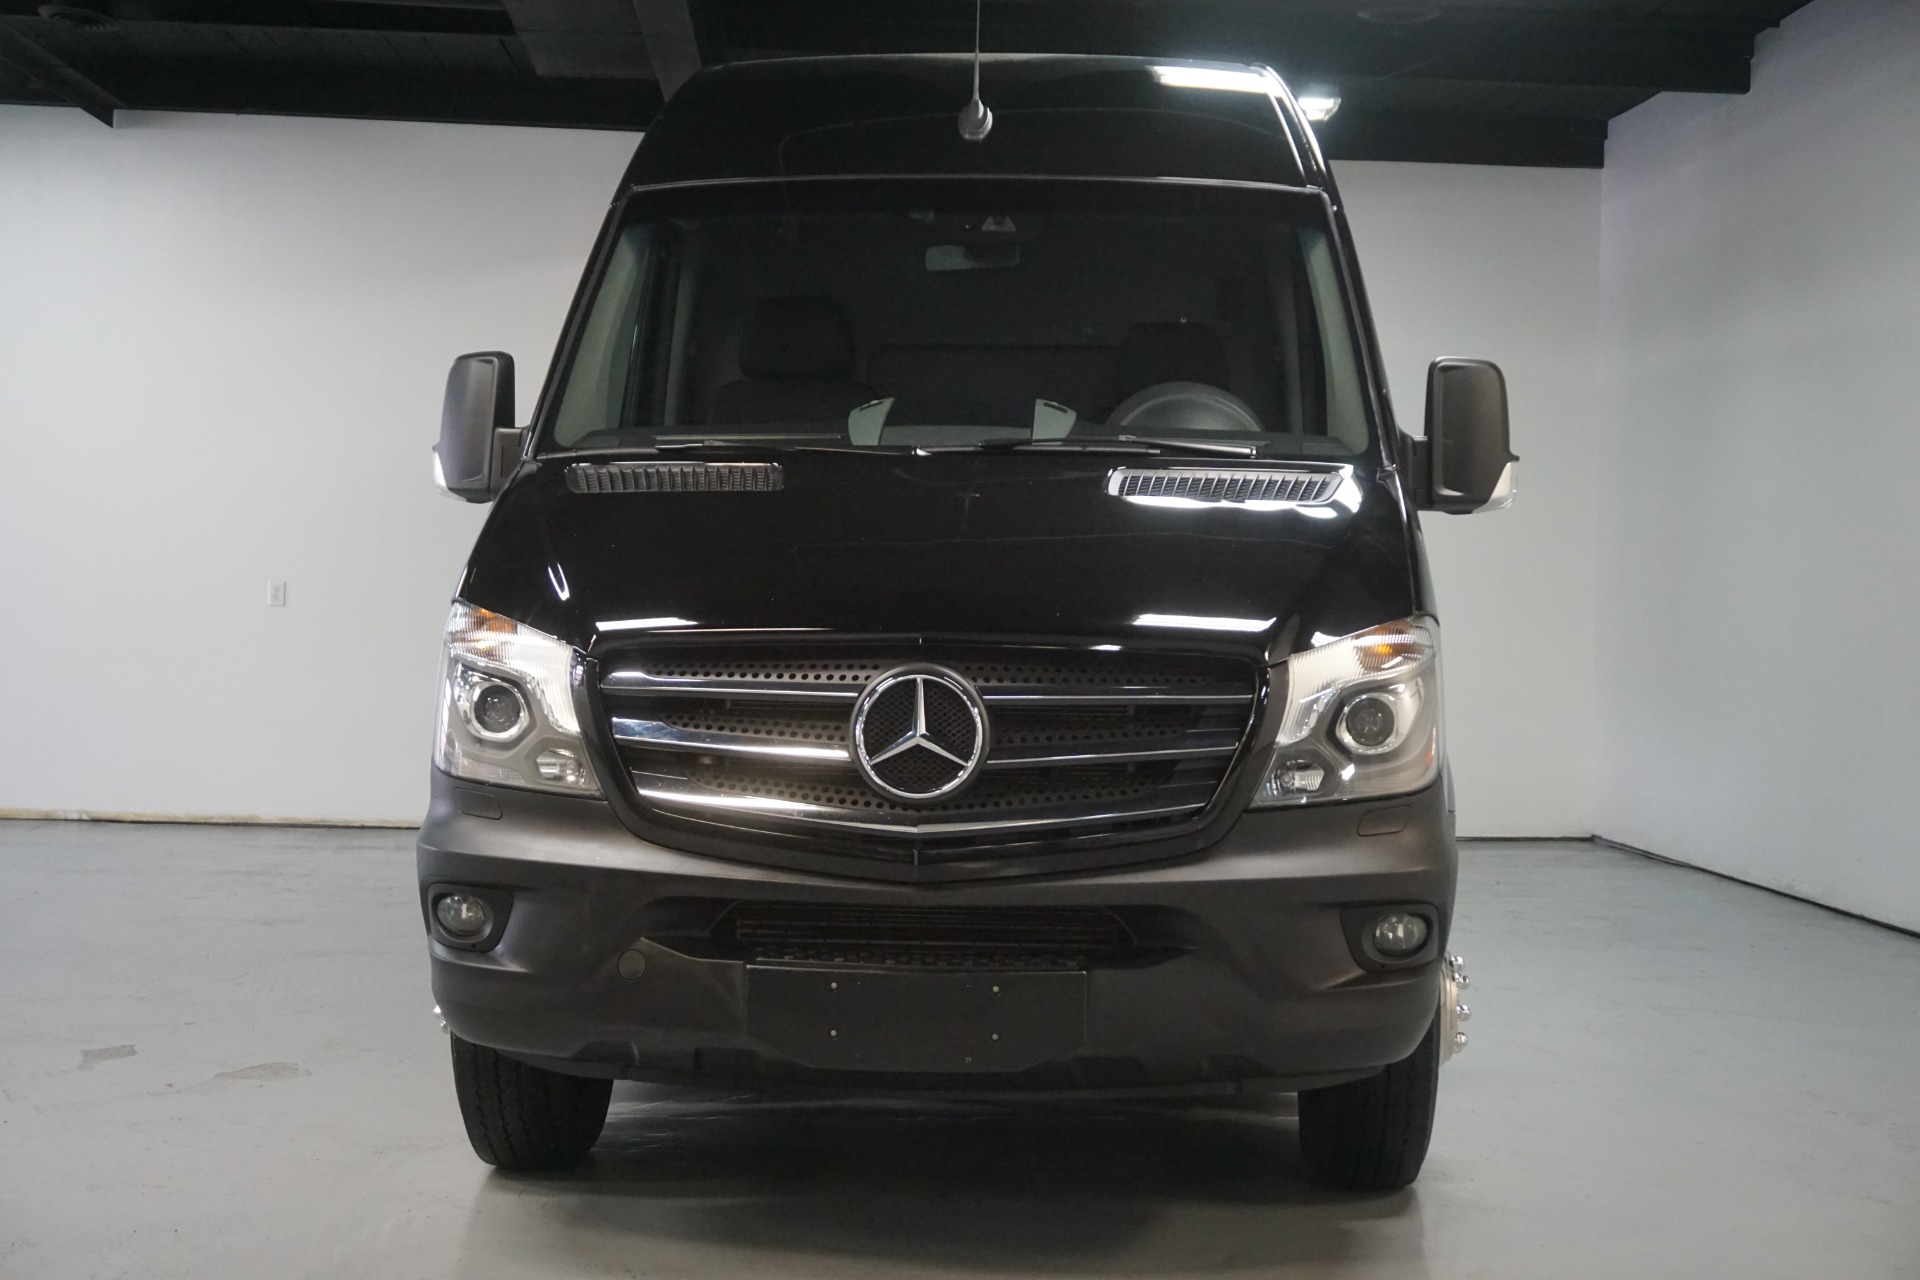 Used 2017 Obsidian Black Metallic Mercedes-Benz Sprinter LCW Automotive  Limousine 3500 XD Sprinter FULL LIMO CONVERSION PACKAGE For Sale (Sold) |  Prime Motorz Stock #2617